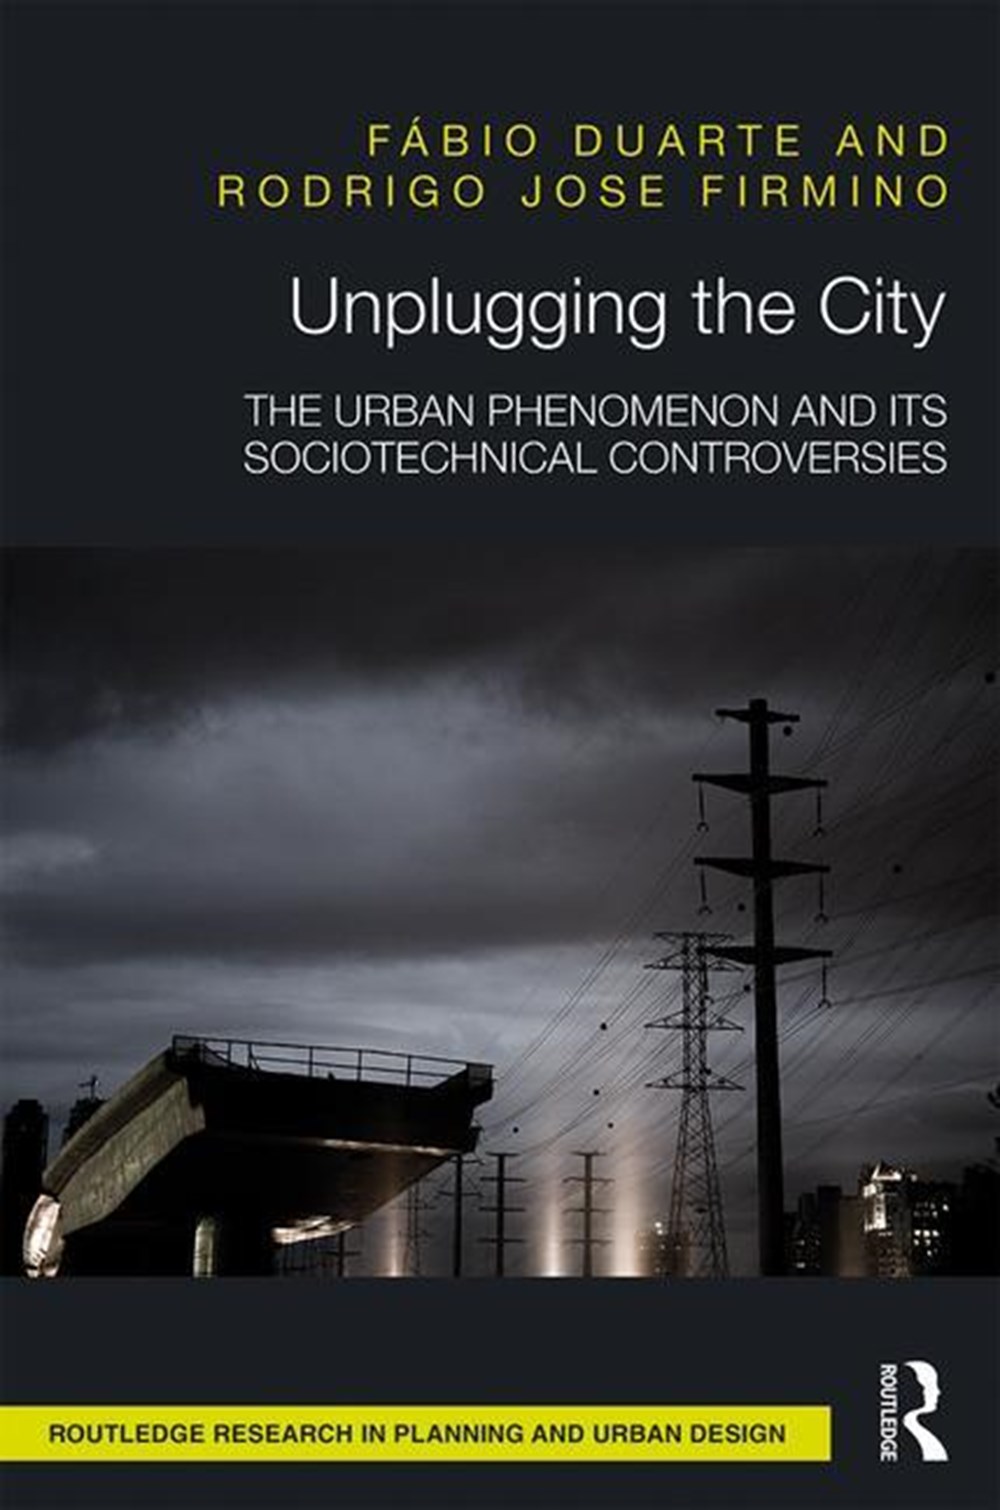 Unplugging the City: The Urban Phenomenon and its Sociotechnical Controversies